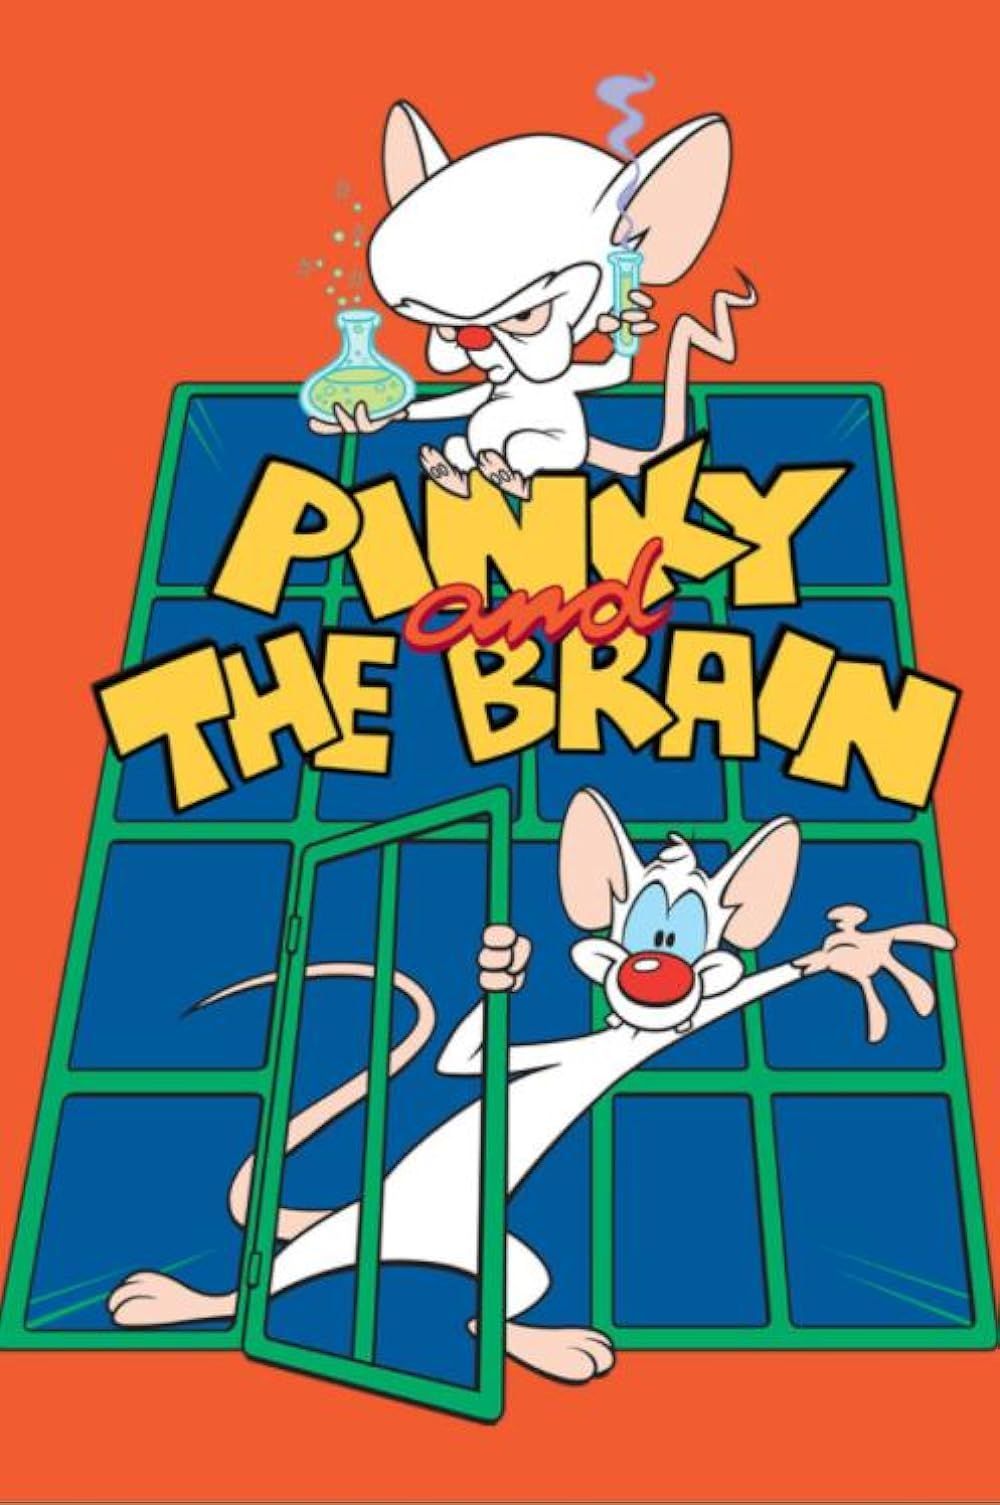 The Brain and Pinky in Pinky and the Brain